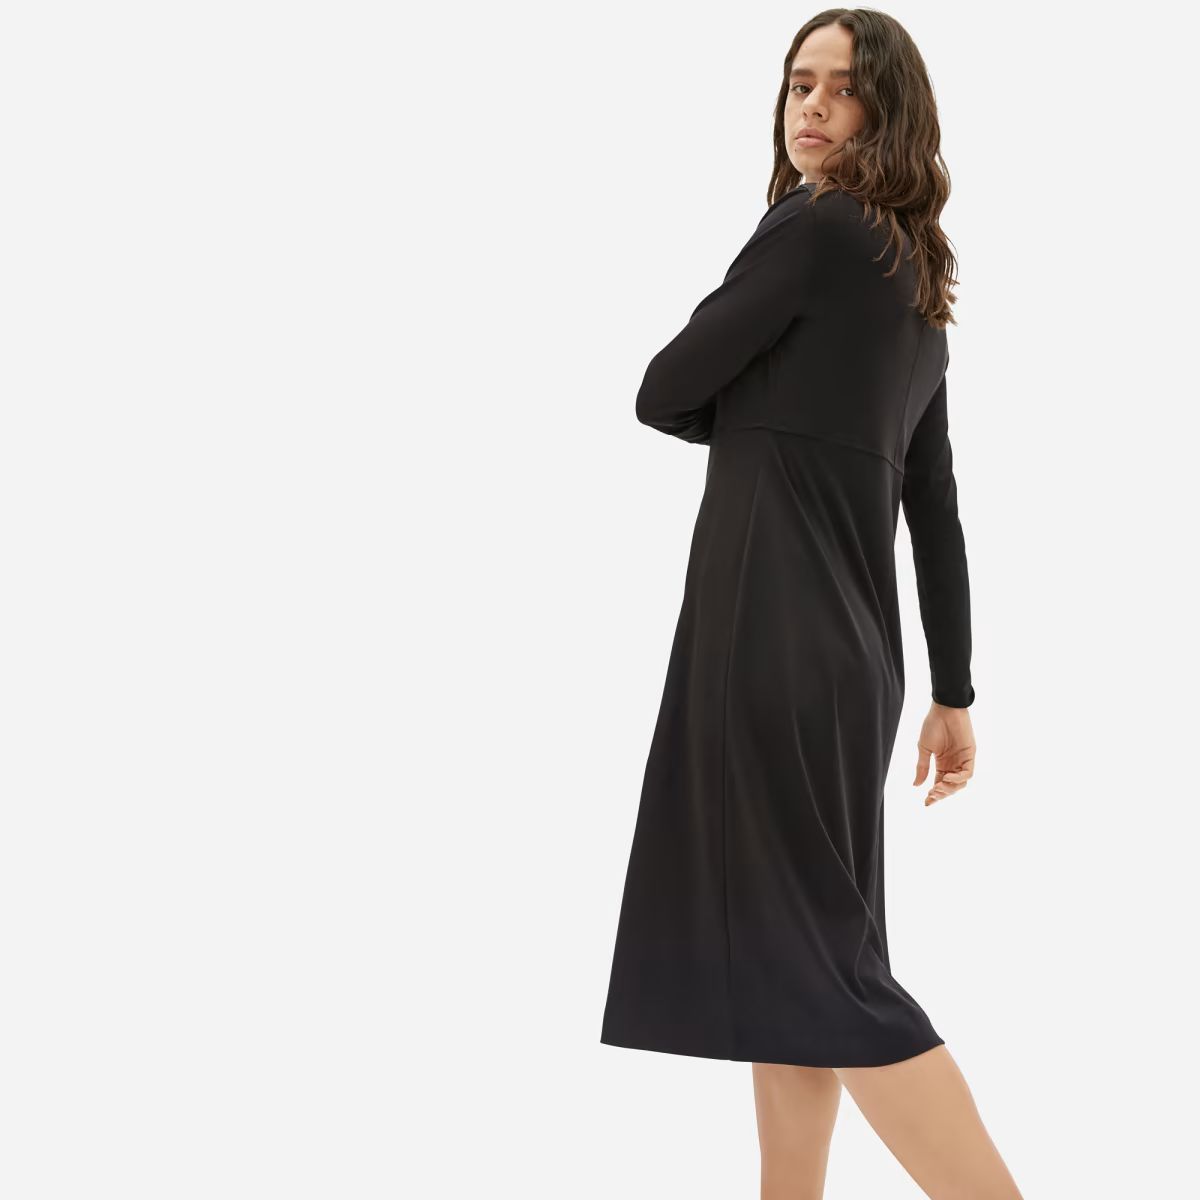 The Luxe Cotton Shirtdress | Everlane